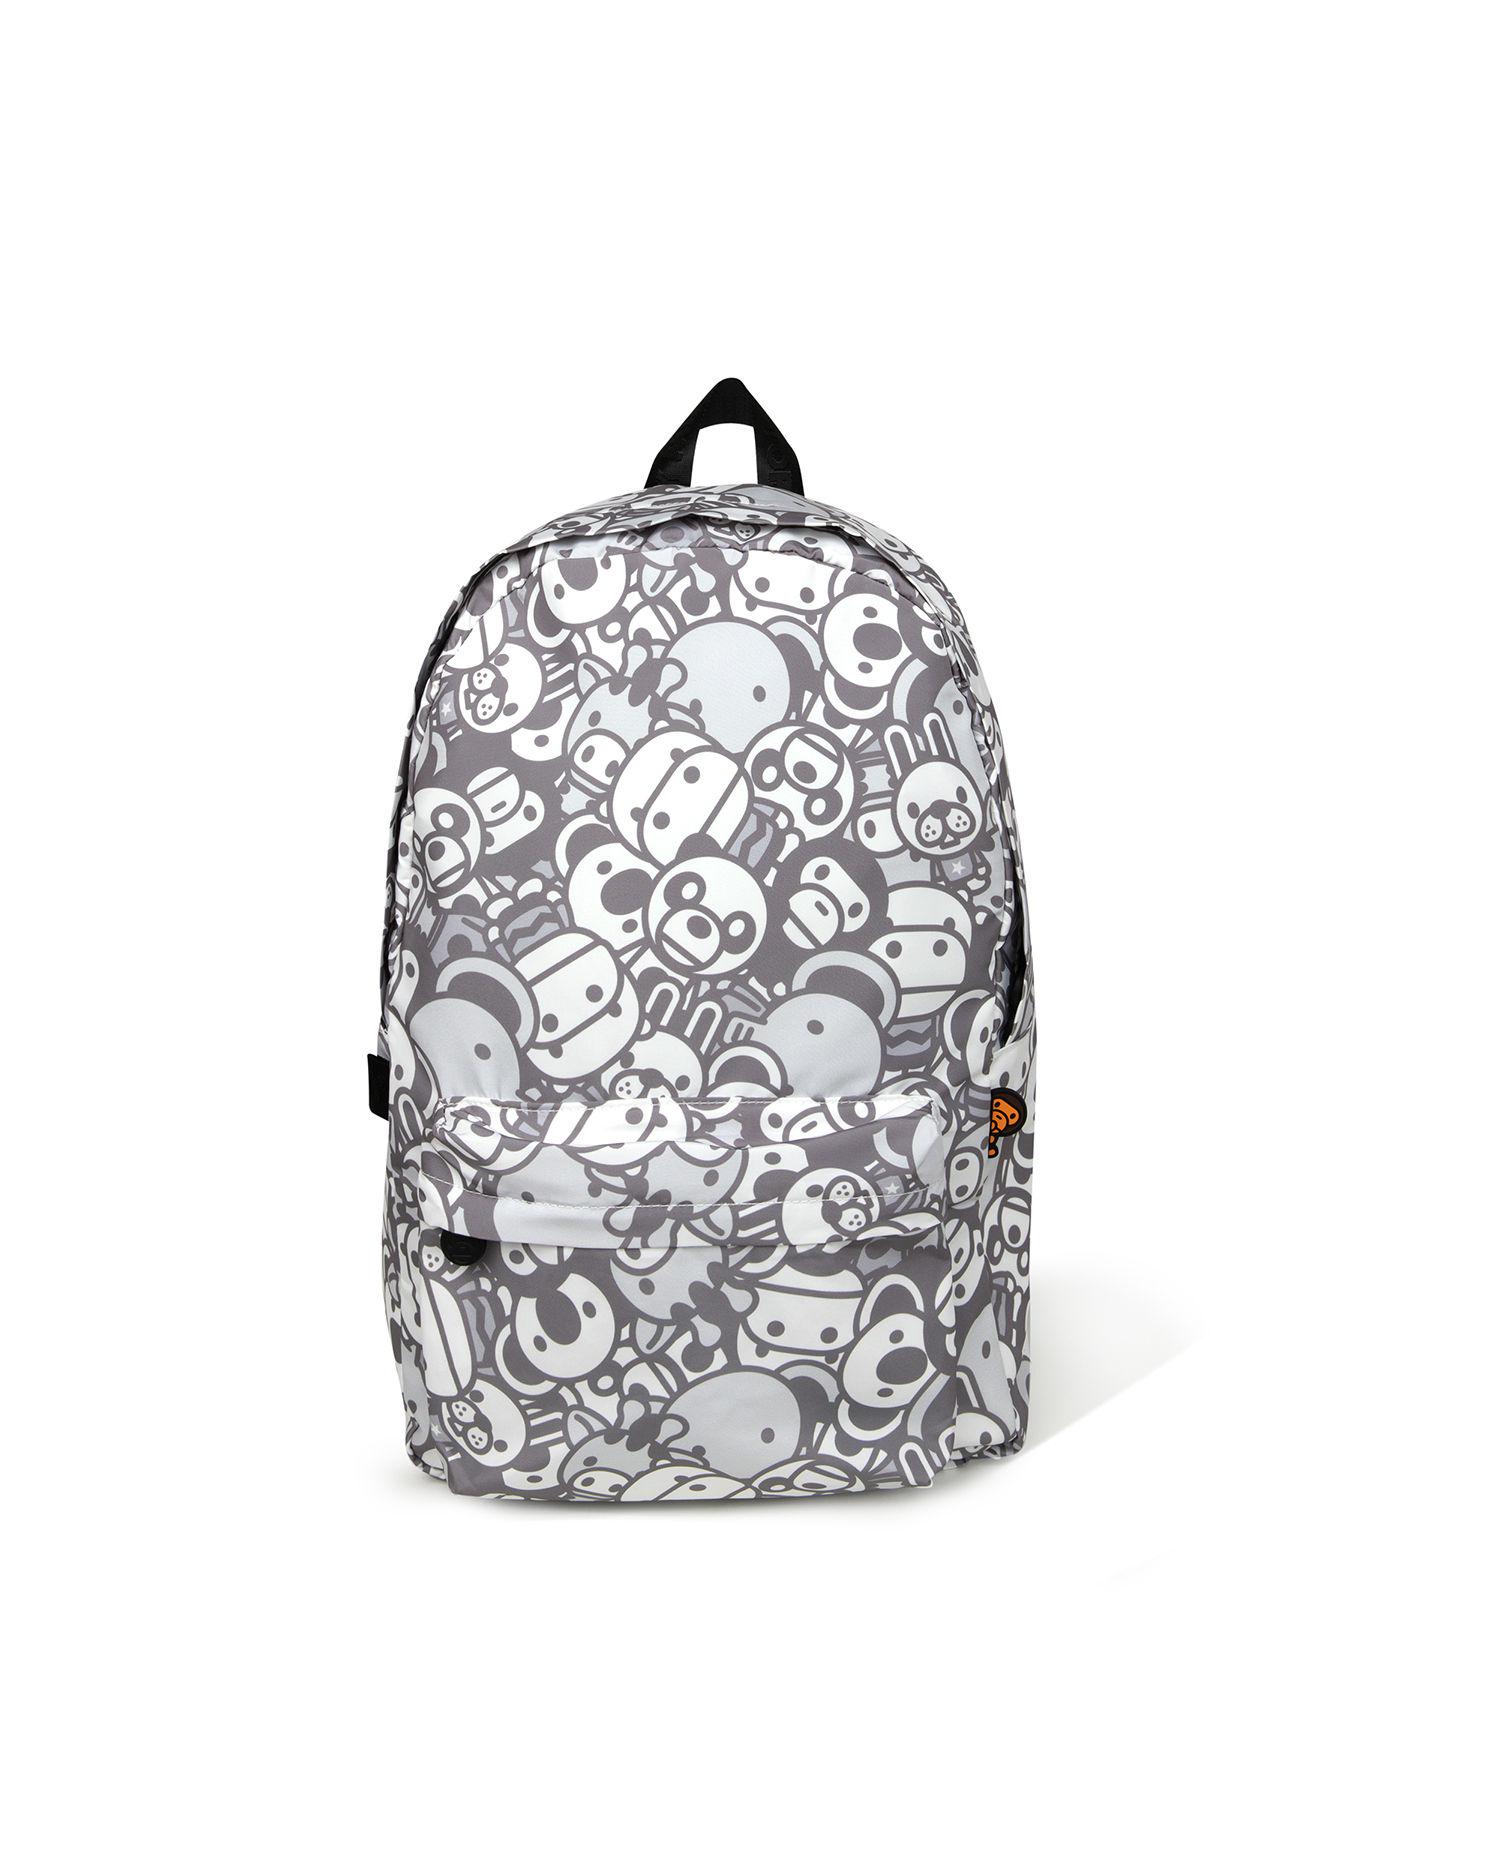 Baby Milo backpack by *BABY MILO(R) STORE